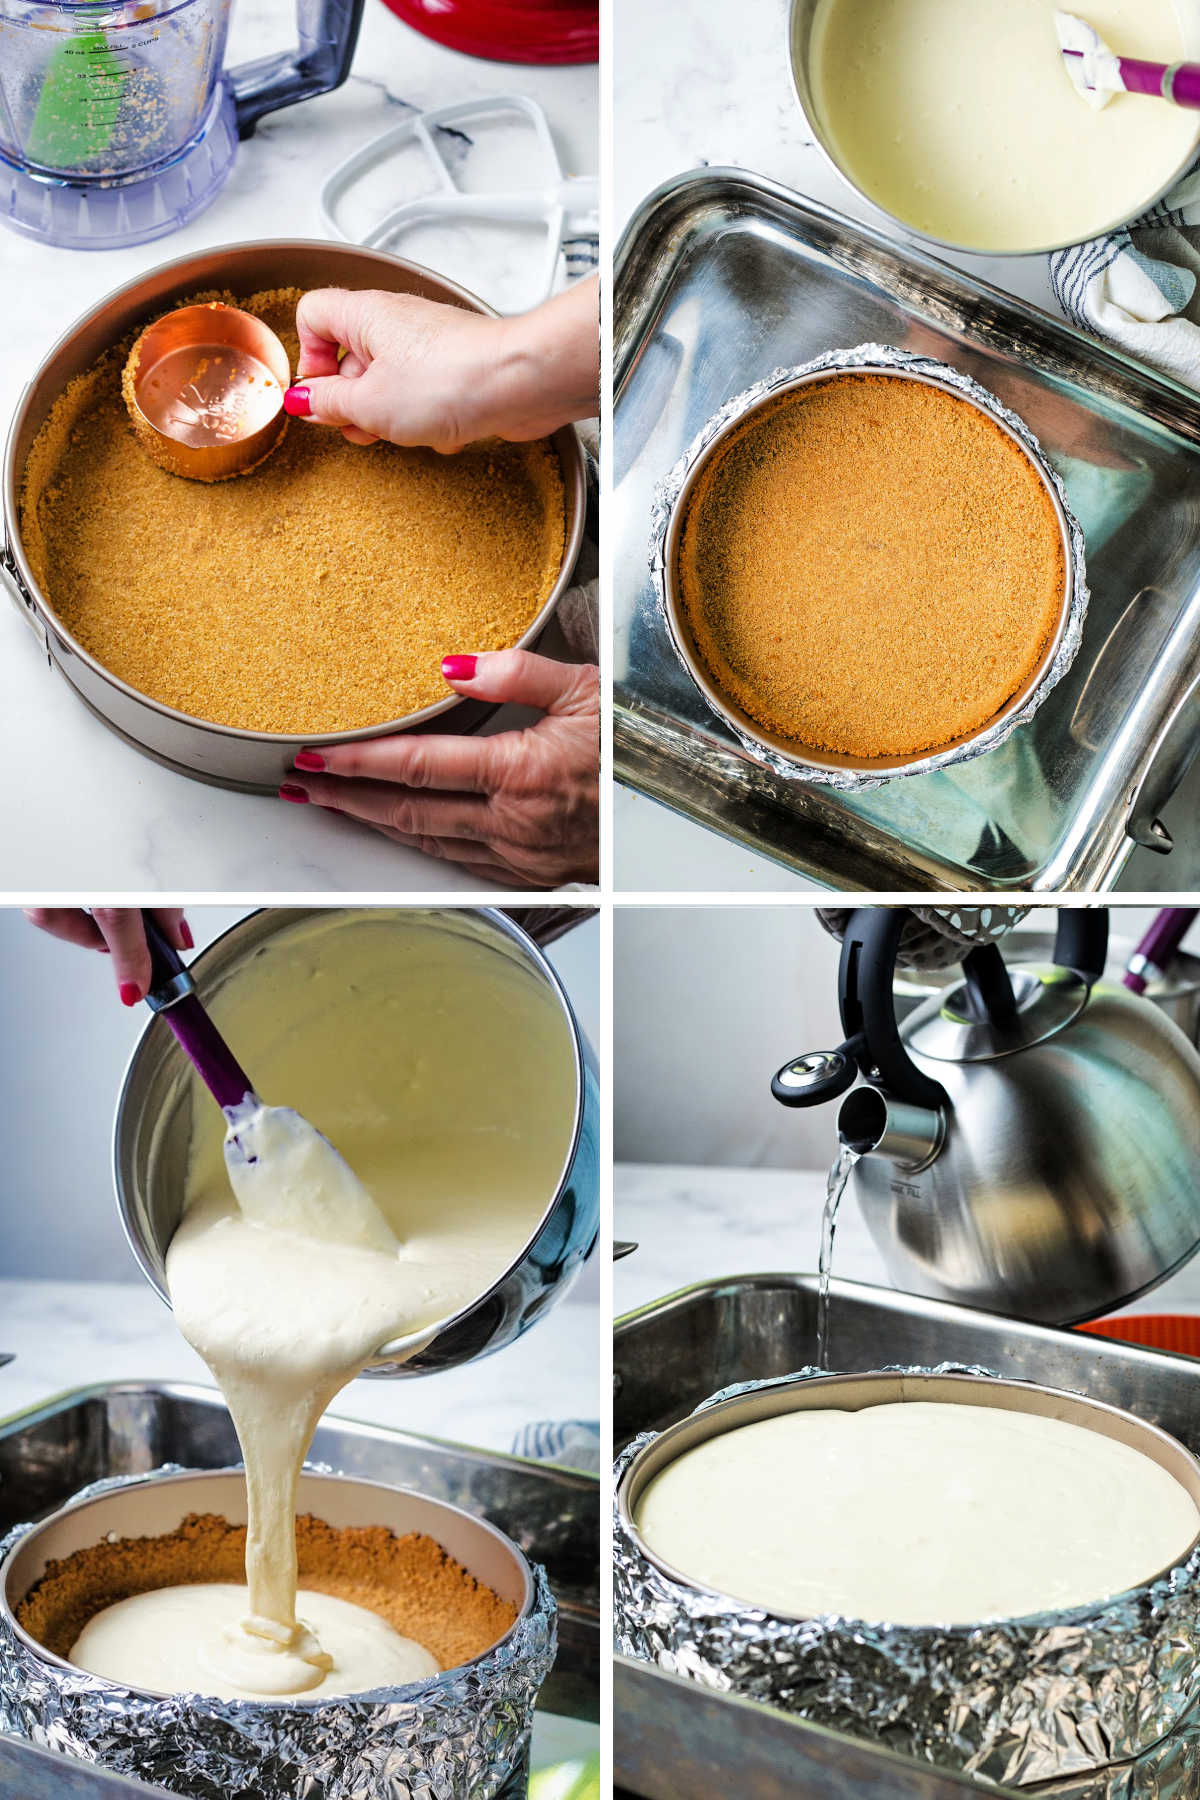 process steps for making cheesecake: press graham cracker crust into springform pan; wrap in aluminum foil and place in roasting pan; pour cheesecake batter into crust; add water to the roasting pan around the cheesecake.